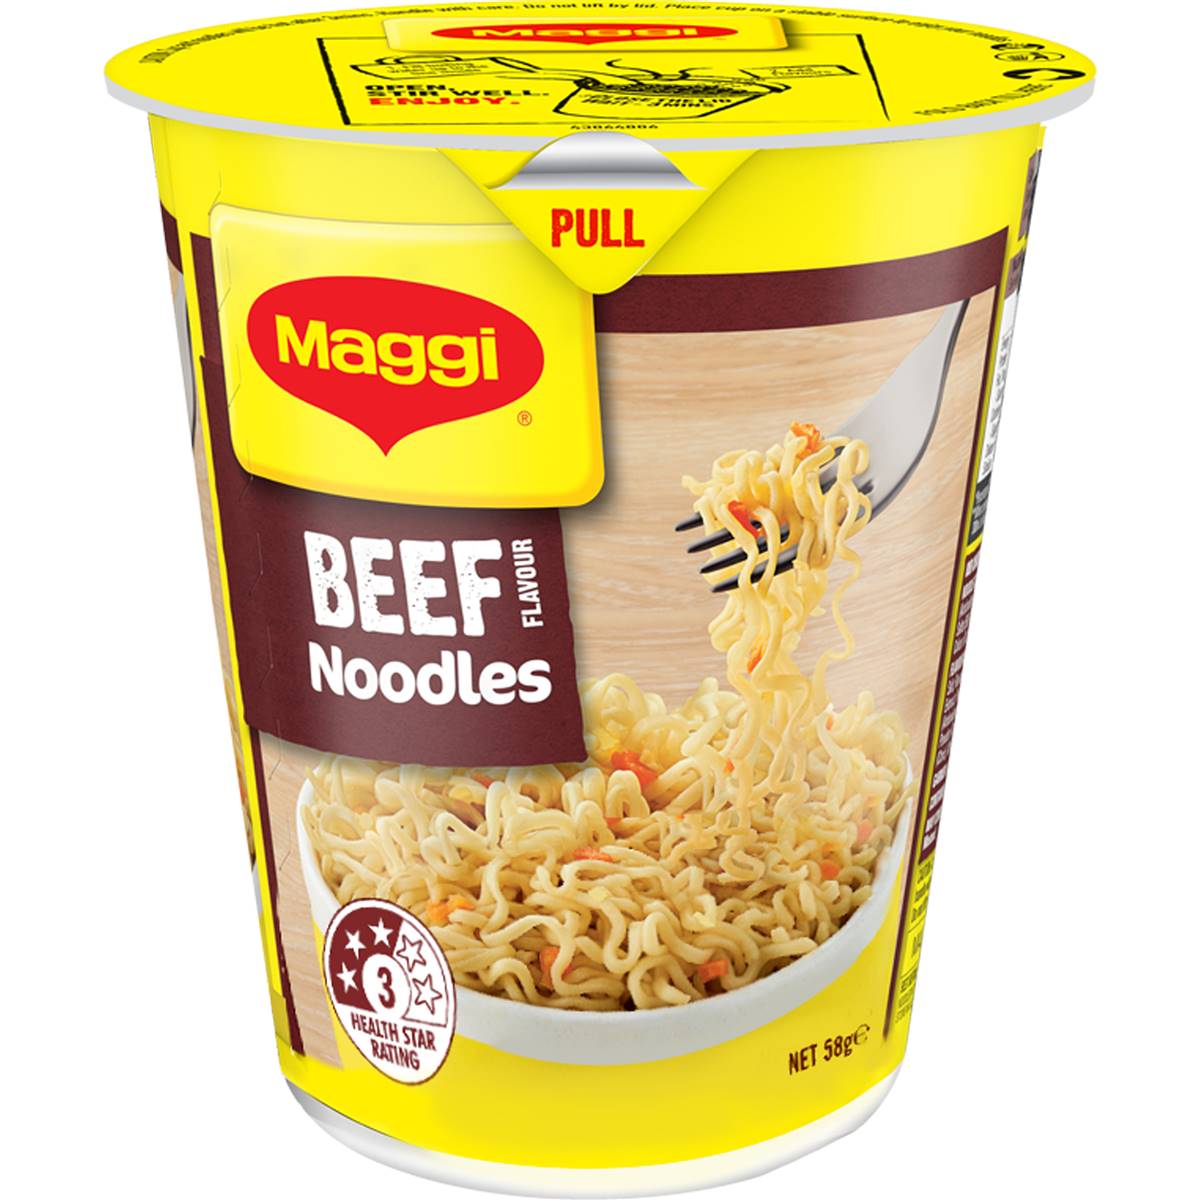 Maggi 2 Minute Instant Cup Noodle Beef